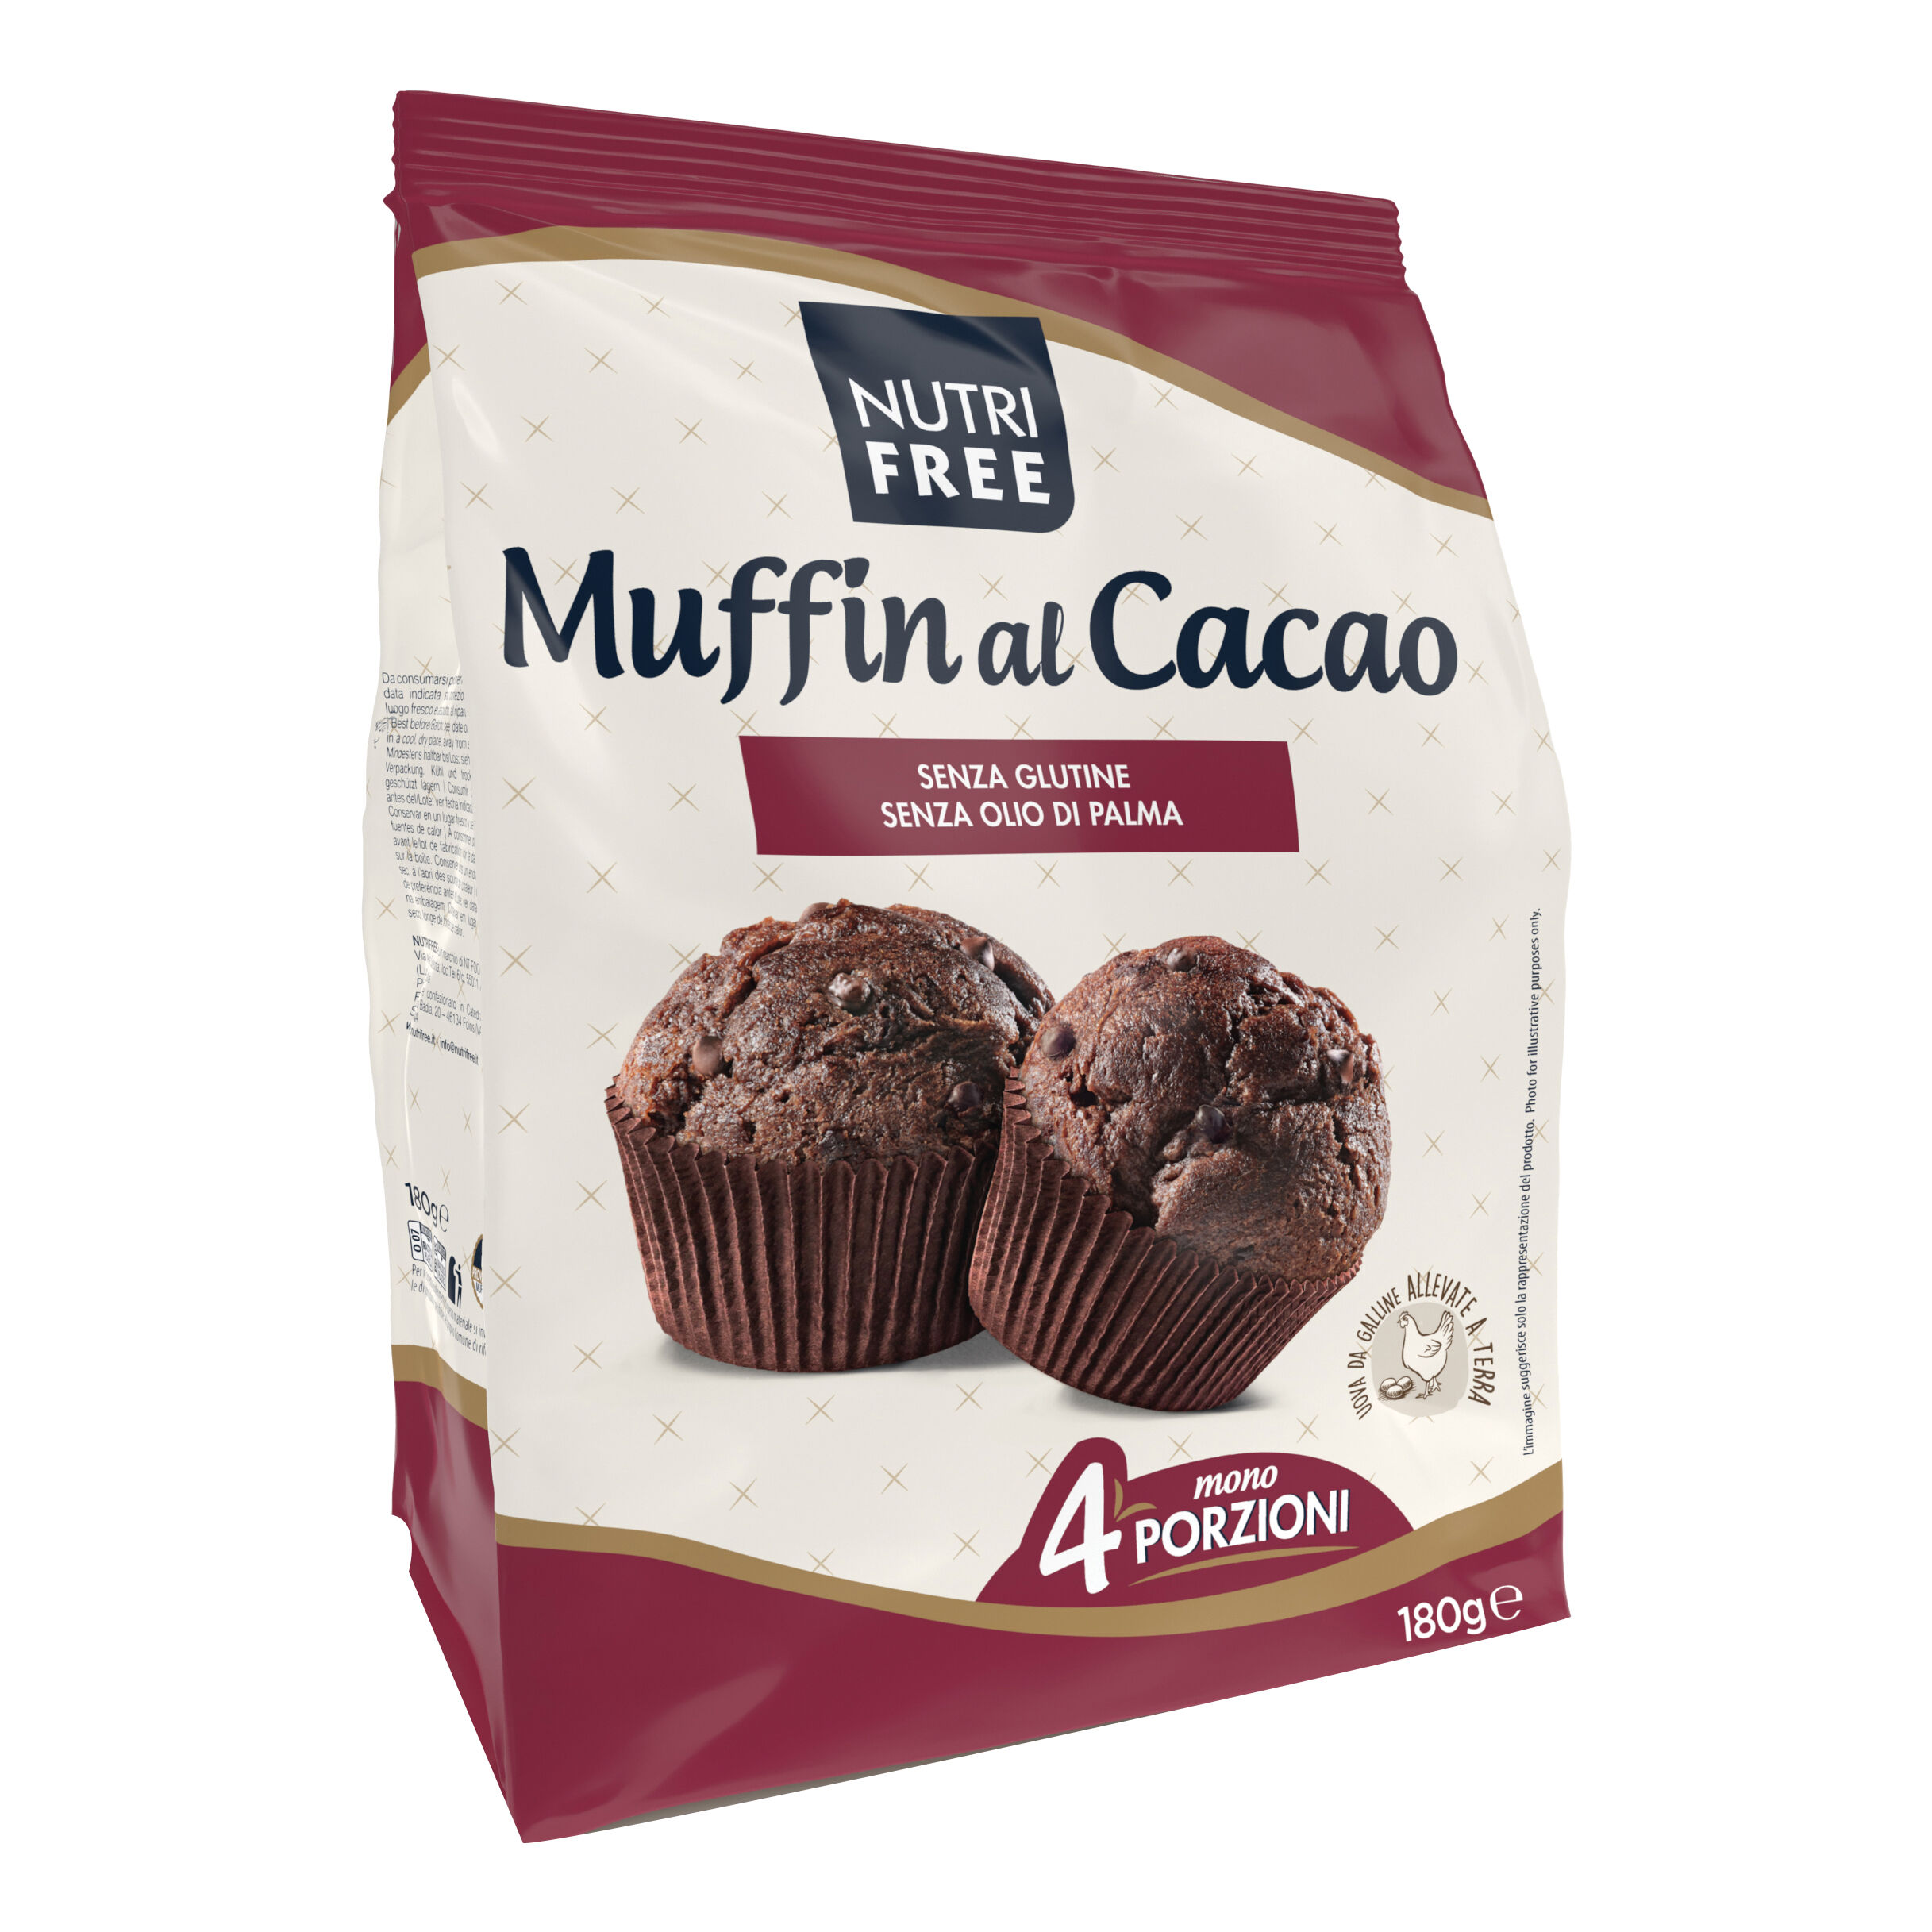 Nt Food Spa Nutrifree Muffin Cacao 4x45g